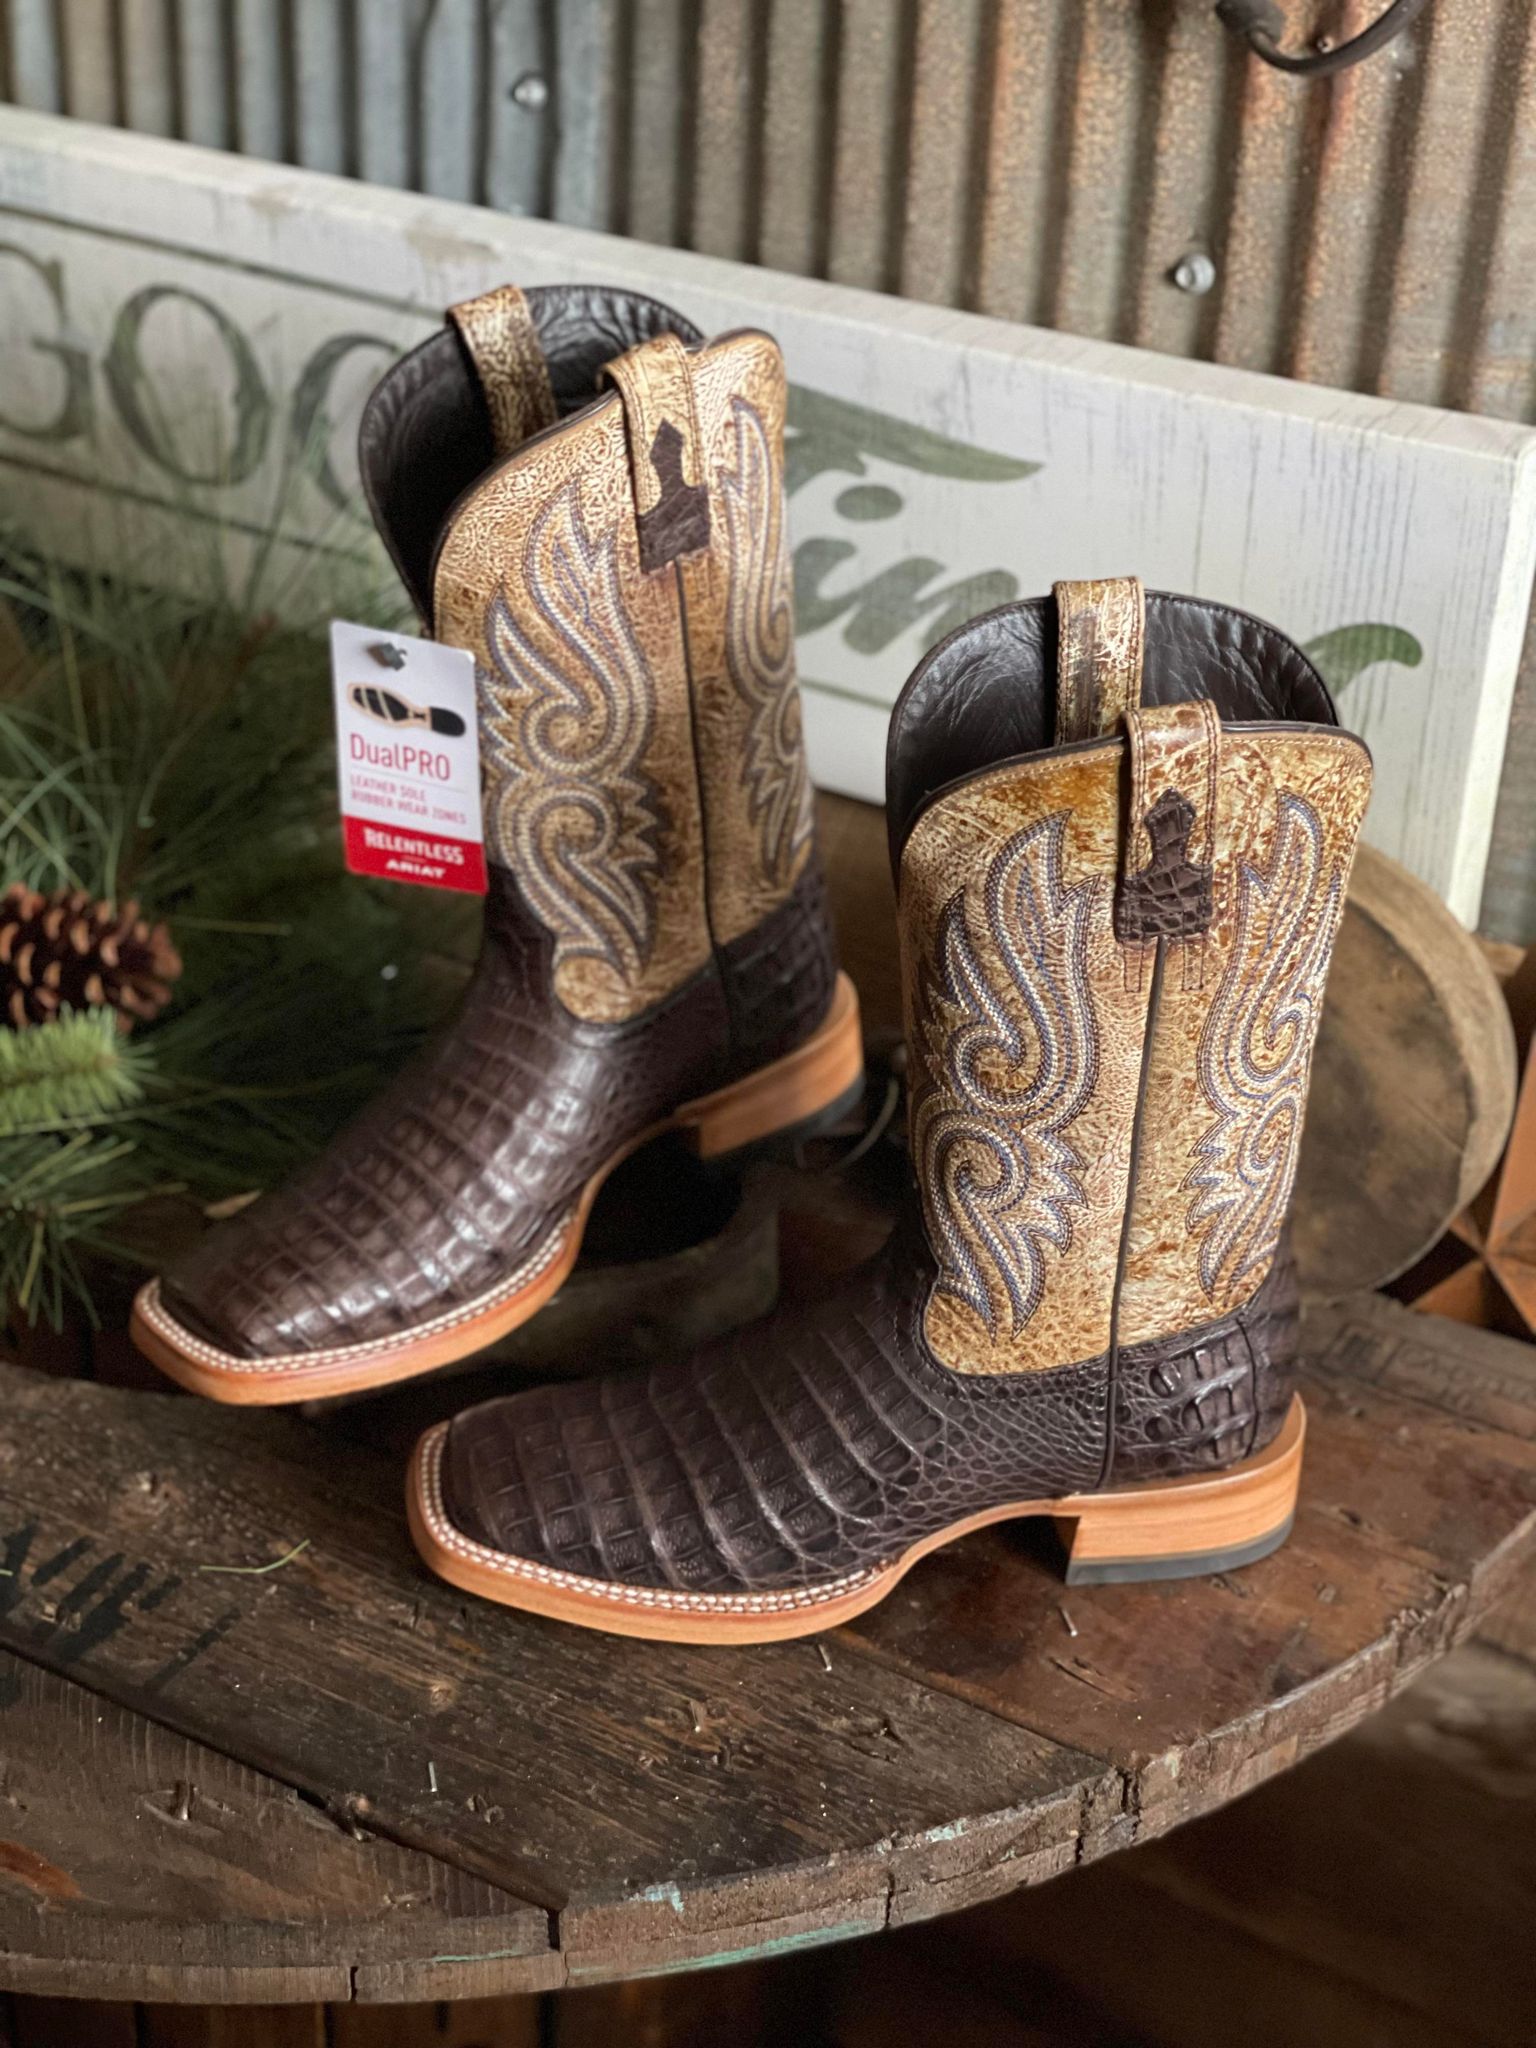 Relentless Ariat Denton Chocolate Caiman Belly Boots-Men's Boots-Ariat-Lucky J Boots & More, Women's, Men's, & Kids Western Store Located in Carthage, MO